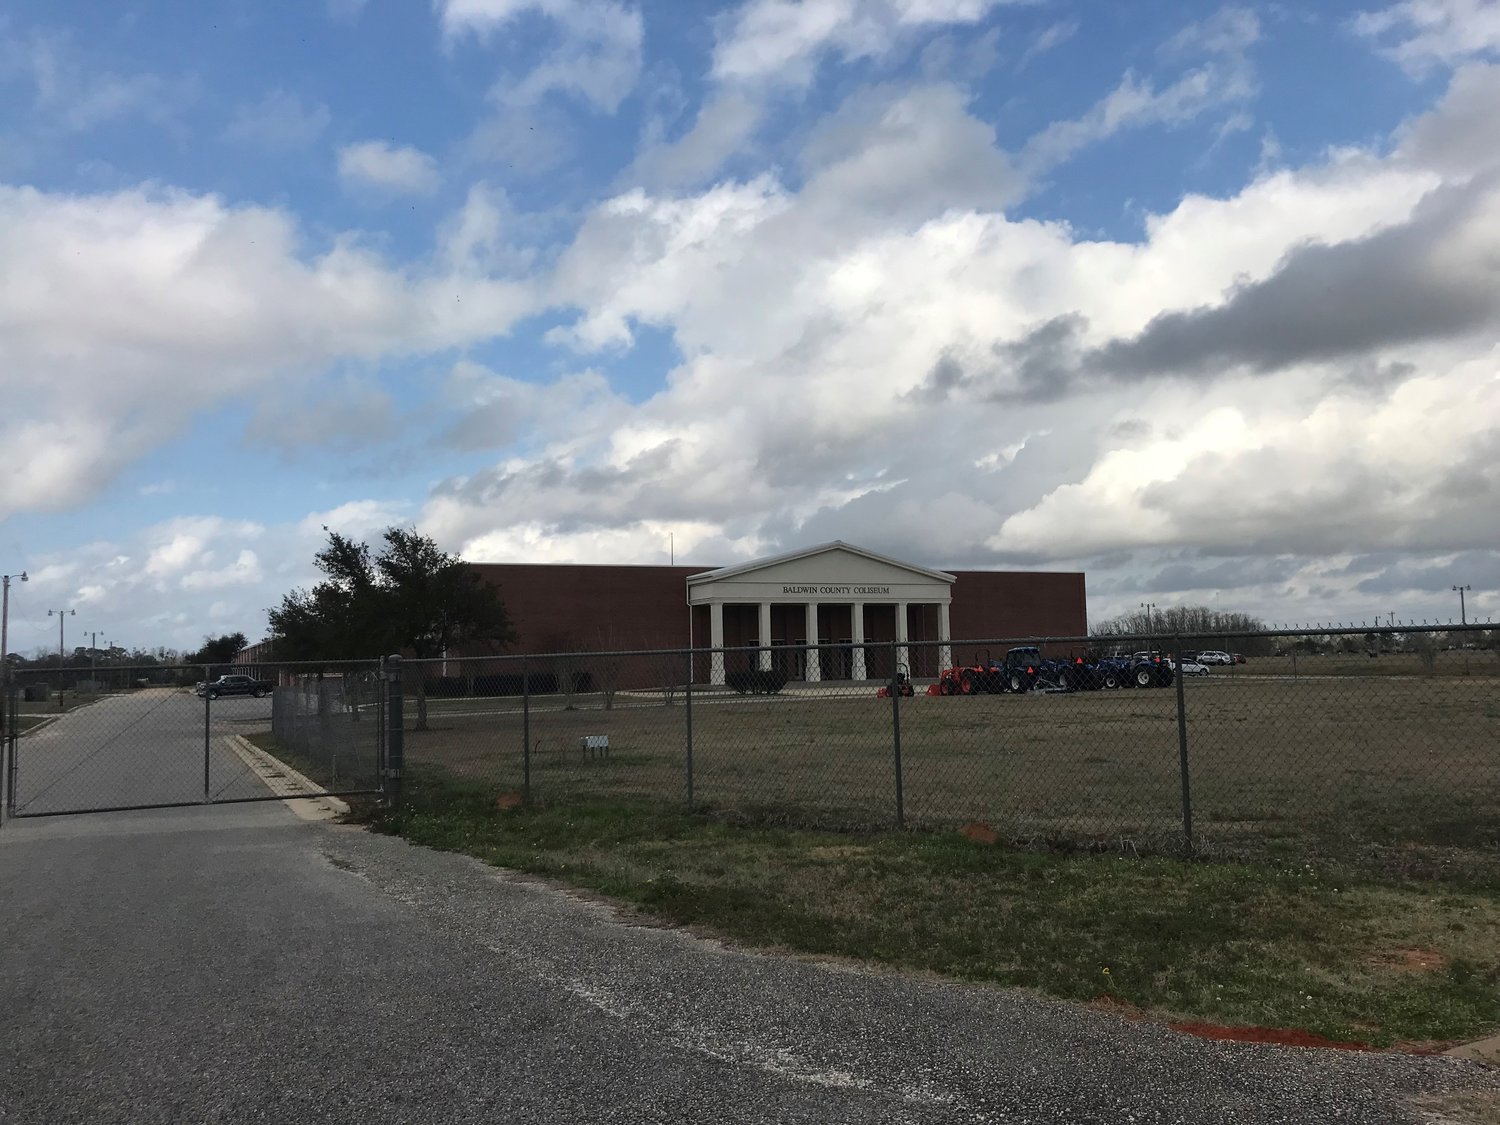 The city of Robertsdale will operate the Baldwin County Coliseum after ending the lease on the site held by the Baldwin County Cattle and Fair Association.